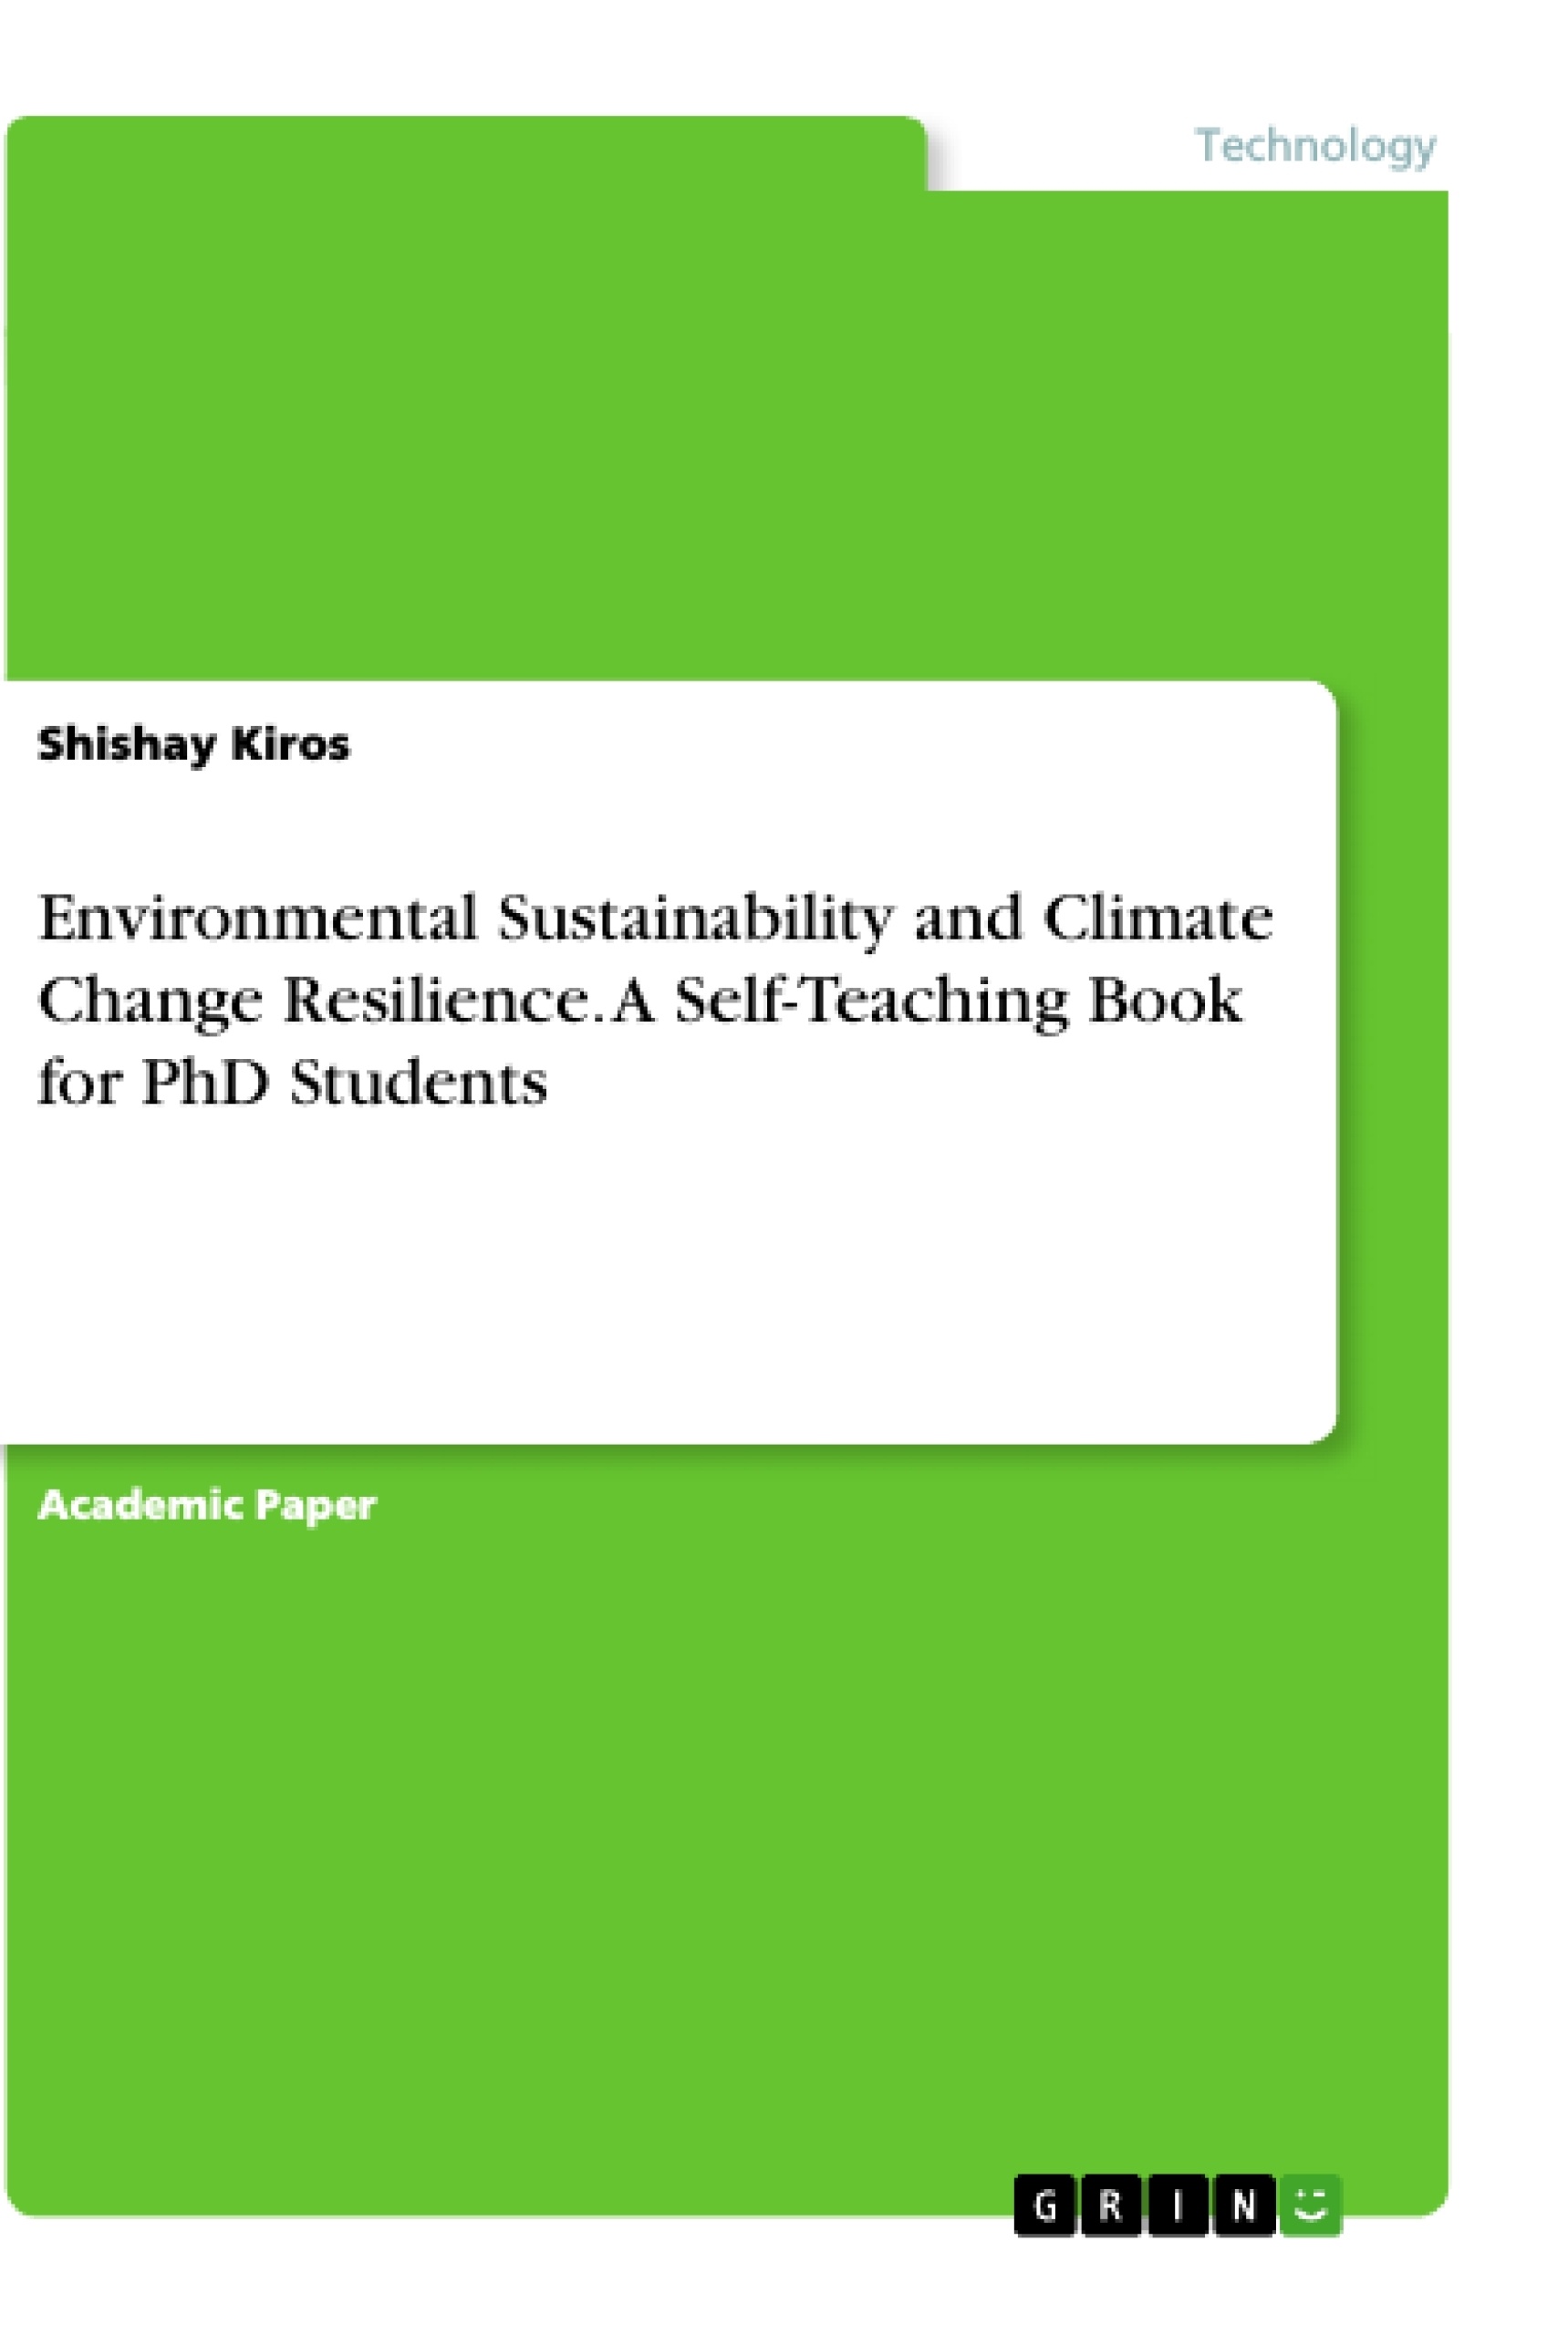 Title: Environmental Sustainability and Climate Change Resilience. A Self-Teaching Book for PhD Students